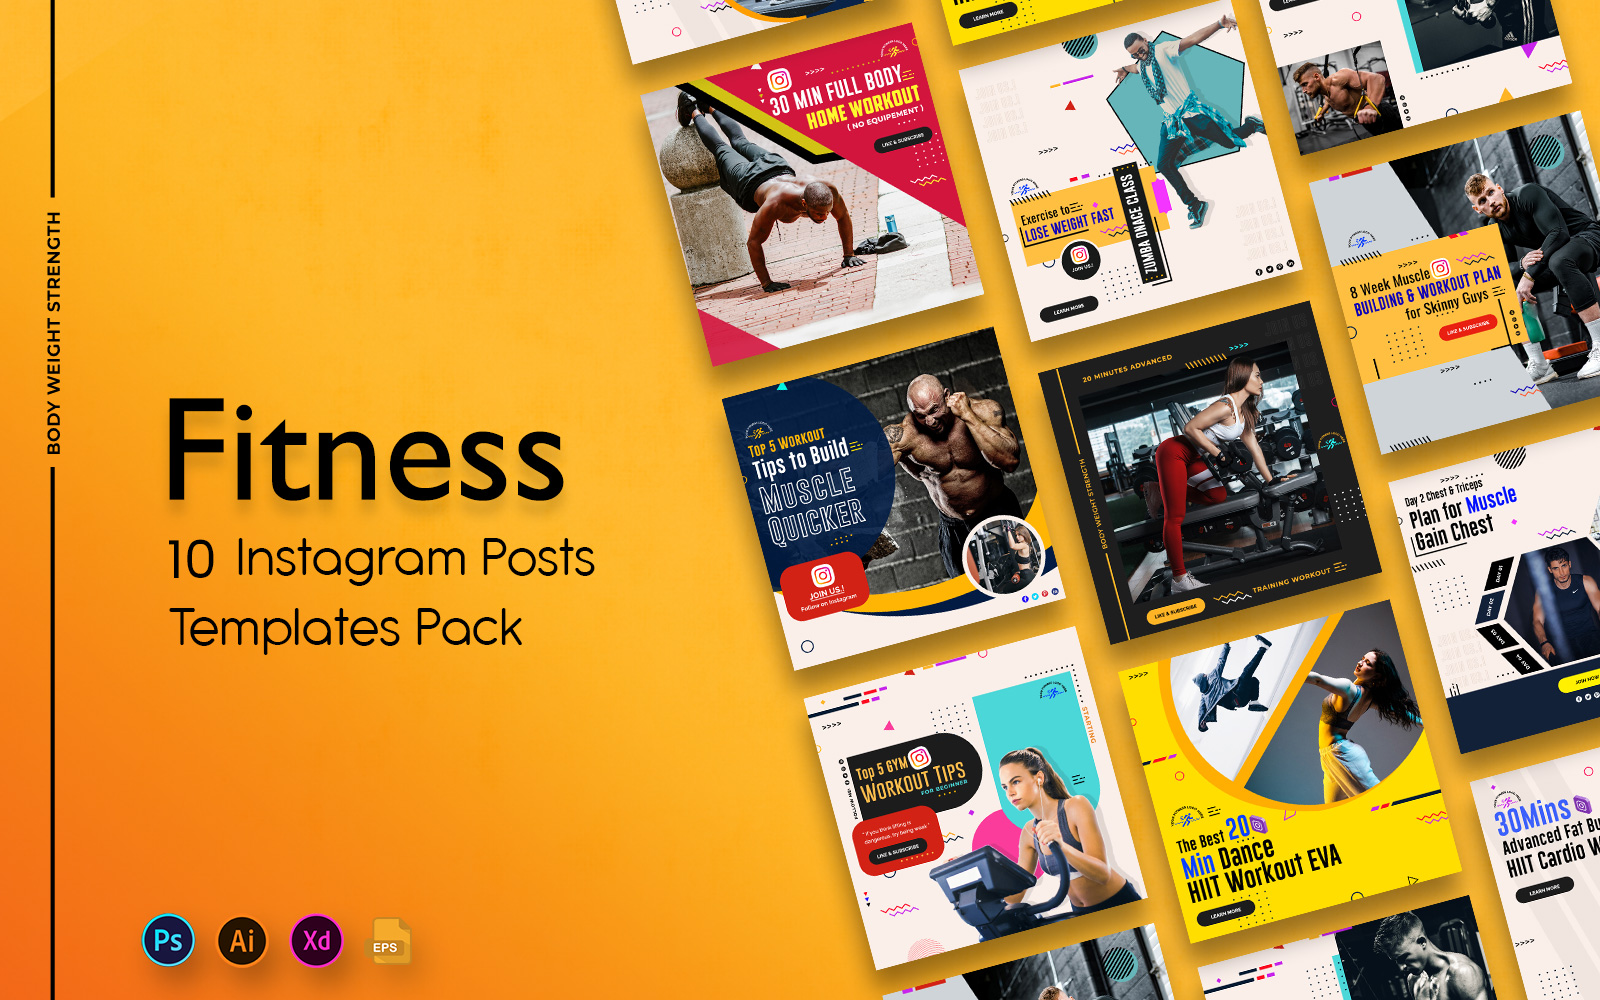 Fitness and Gym Social Media Posts Templates